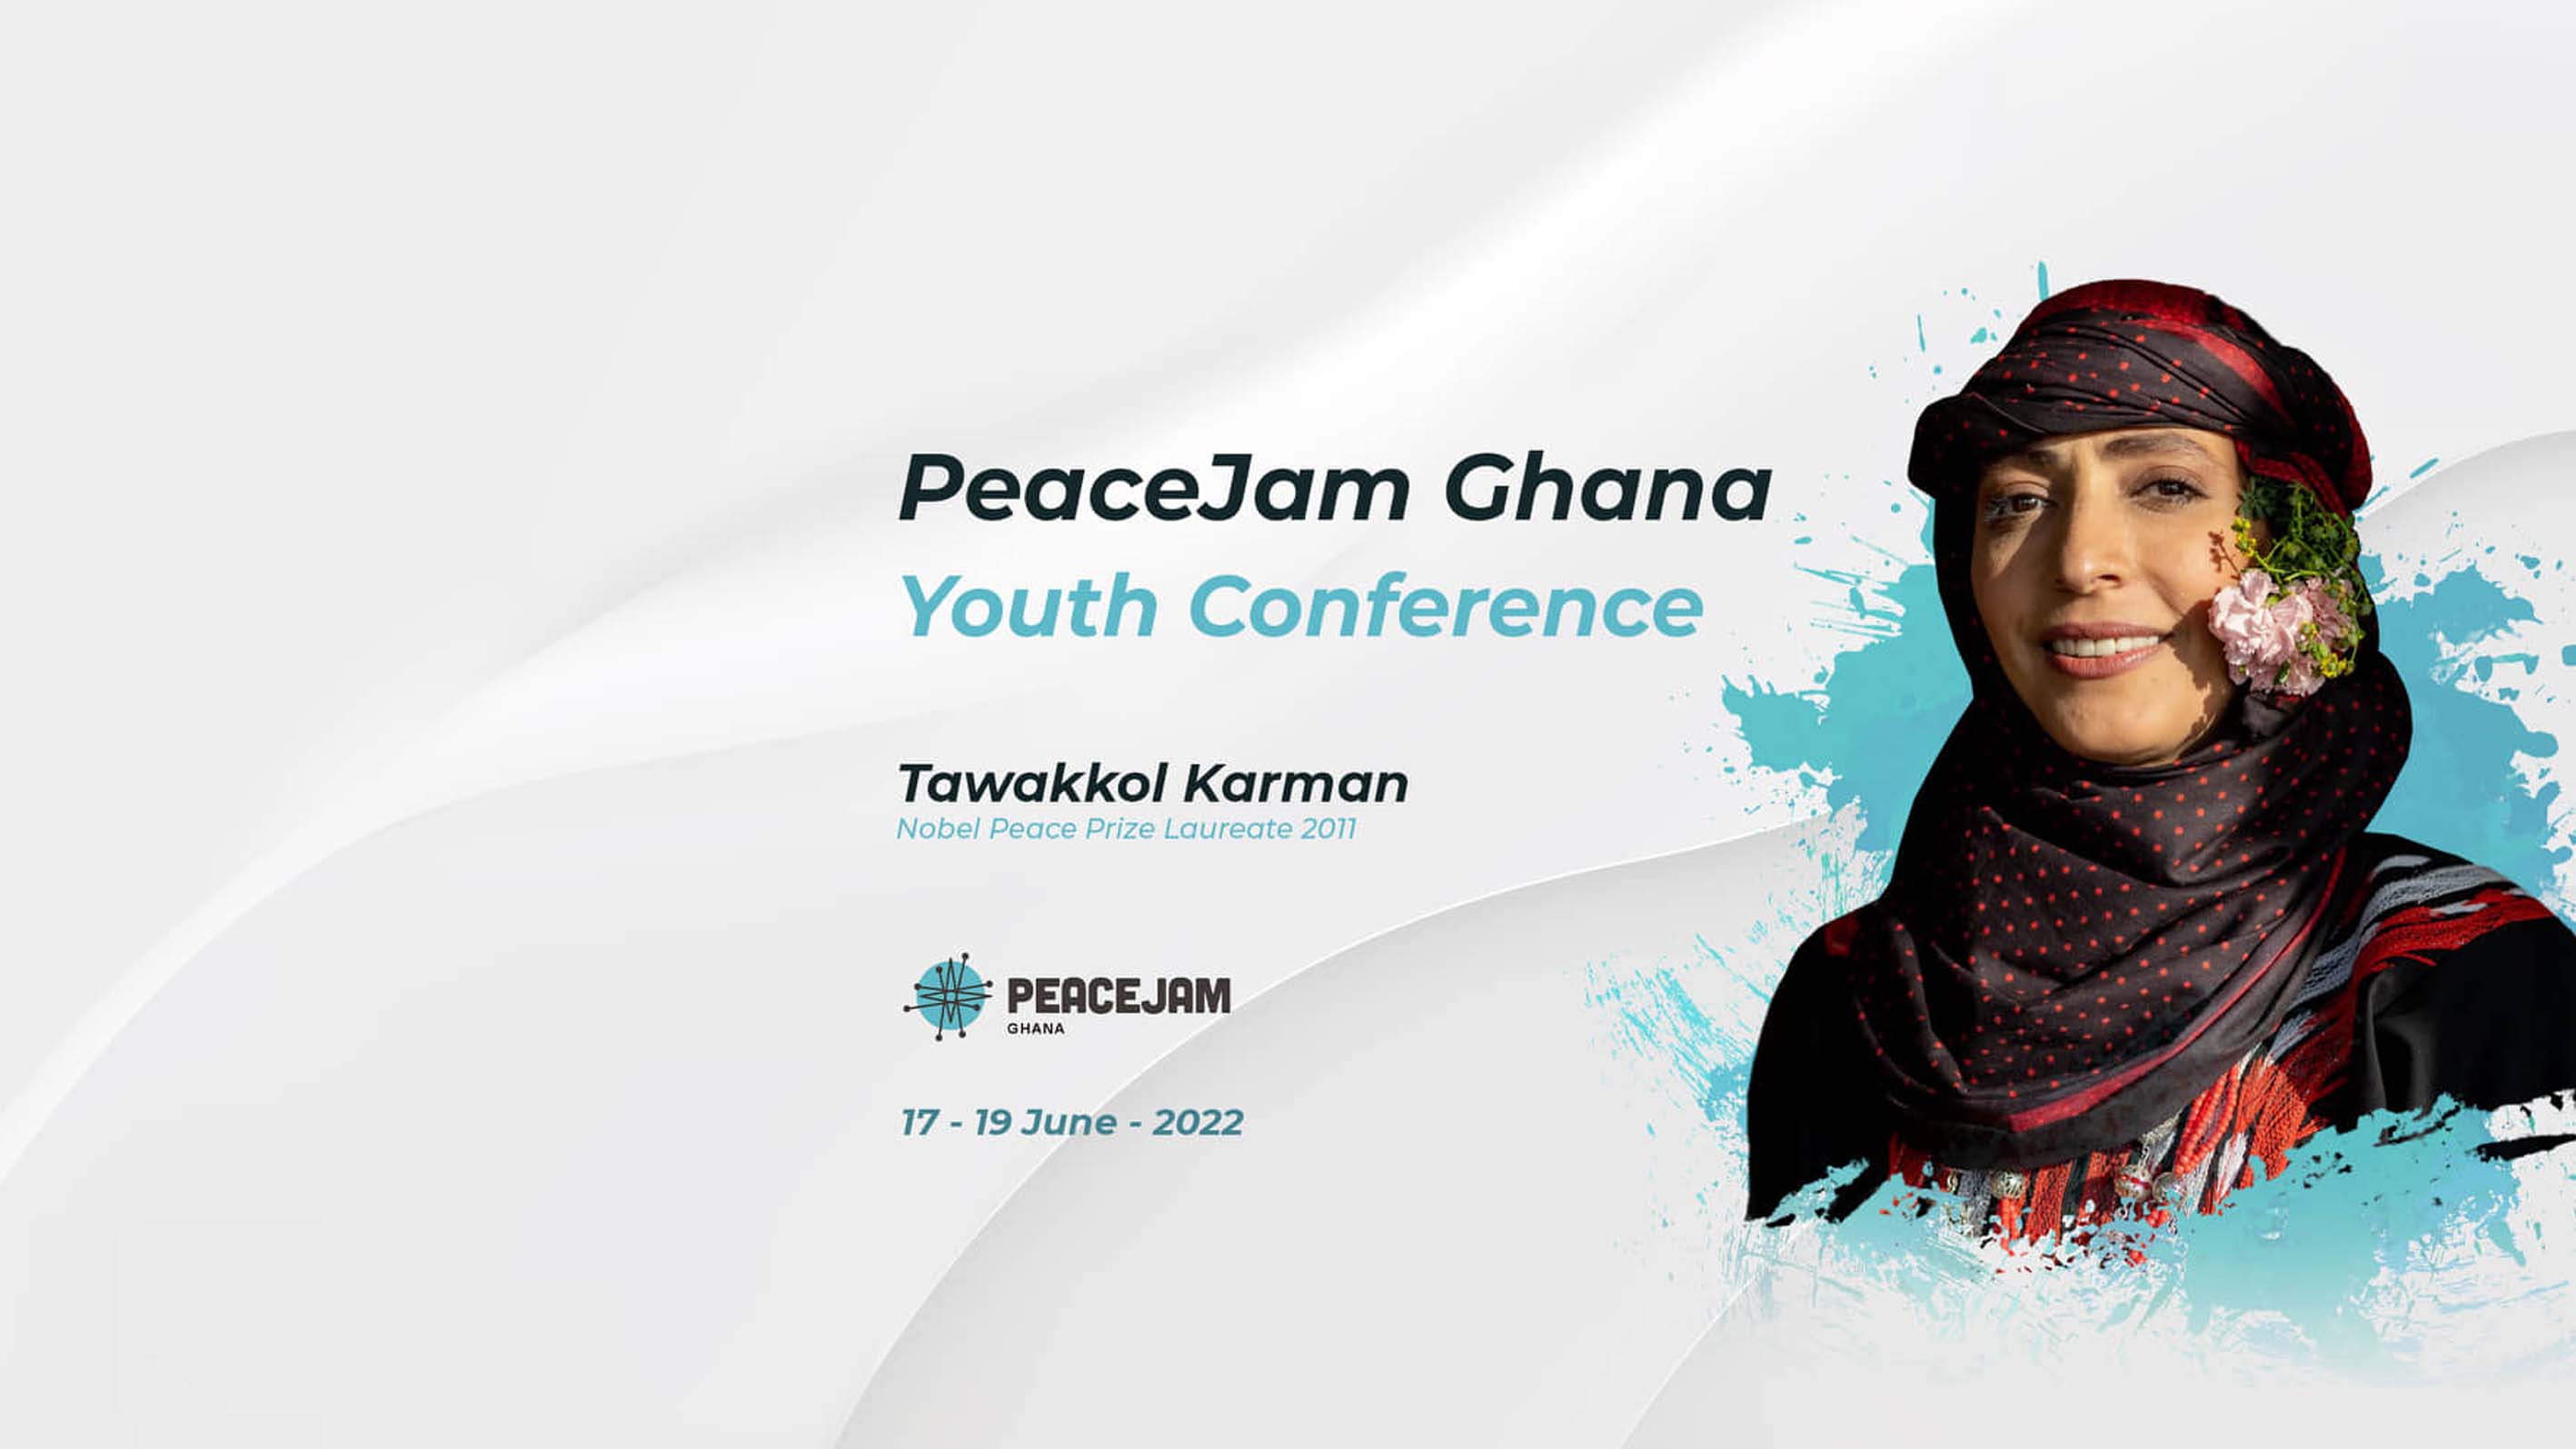 Tawakkol Karman delivers a speech at PeaceJam Ghana Youth Conference